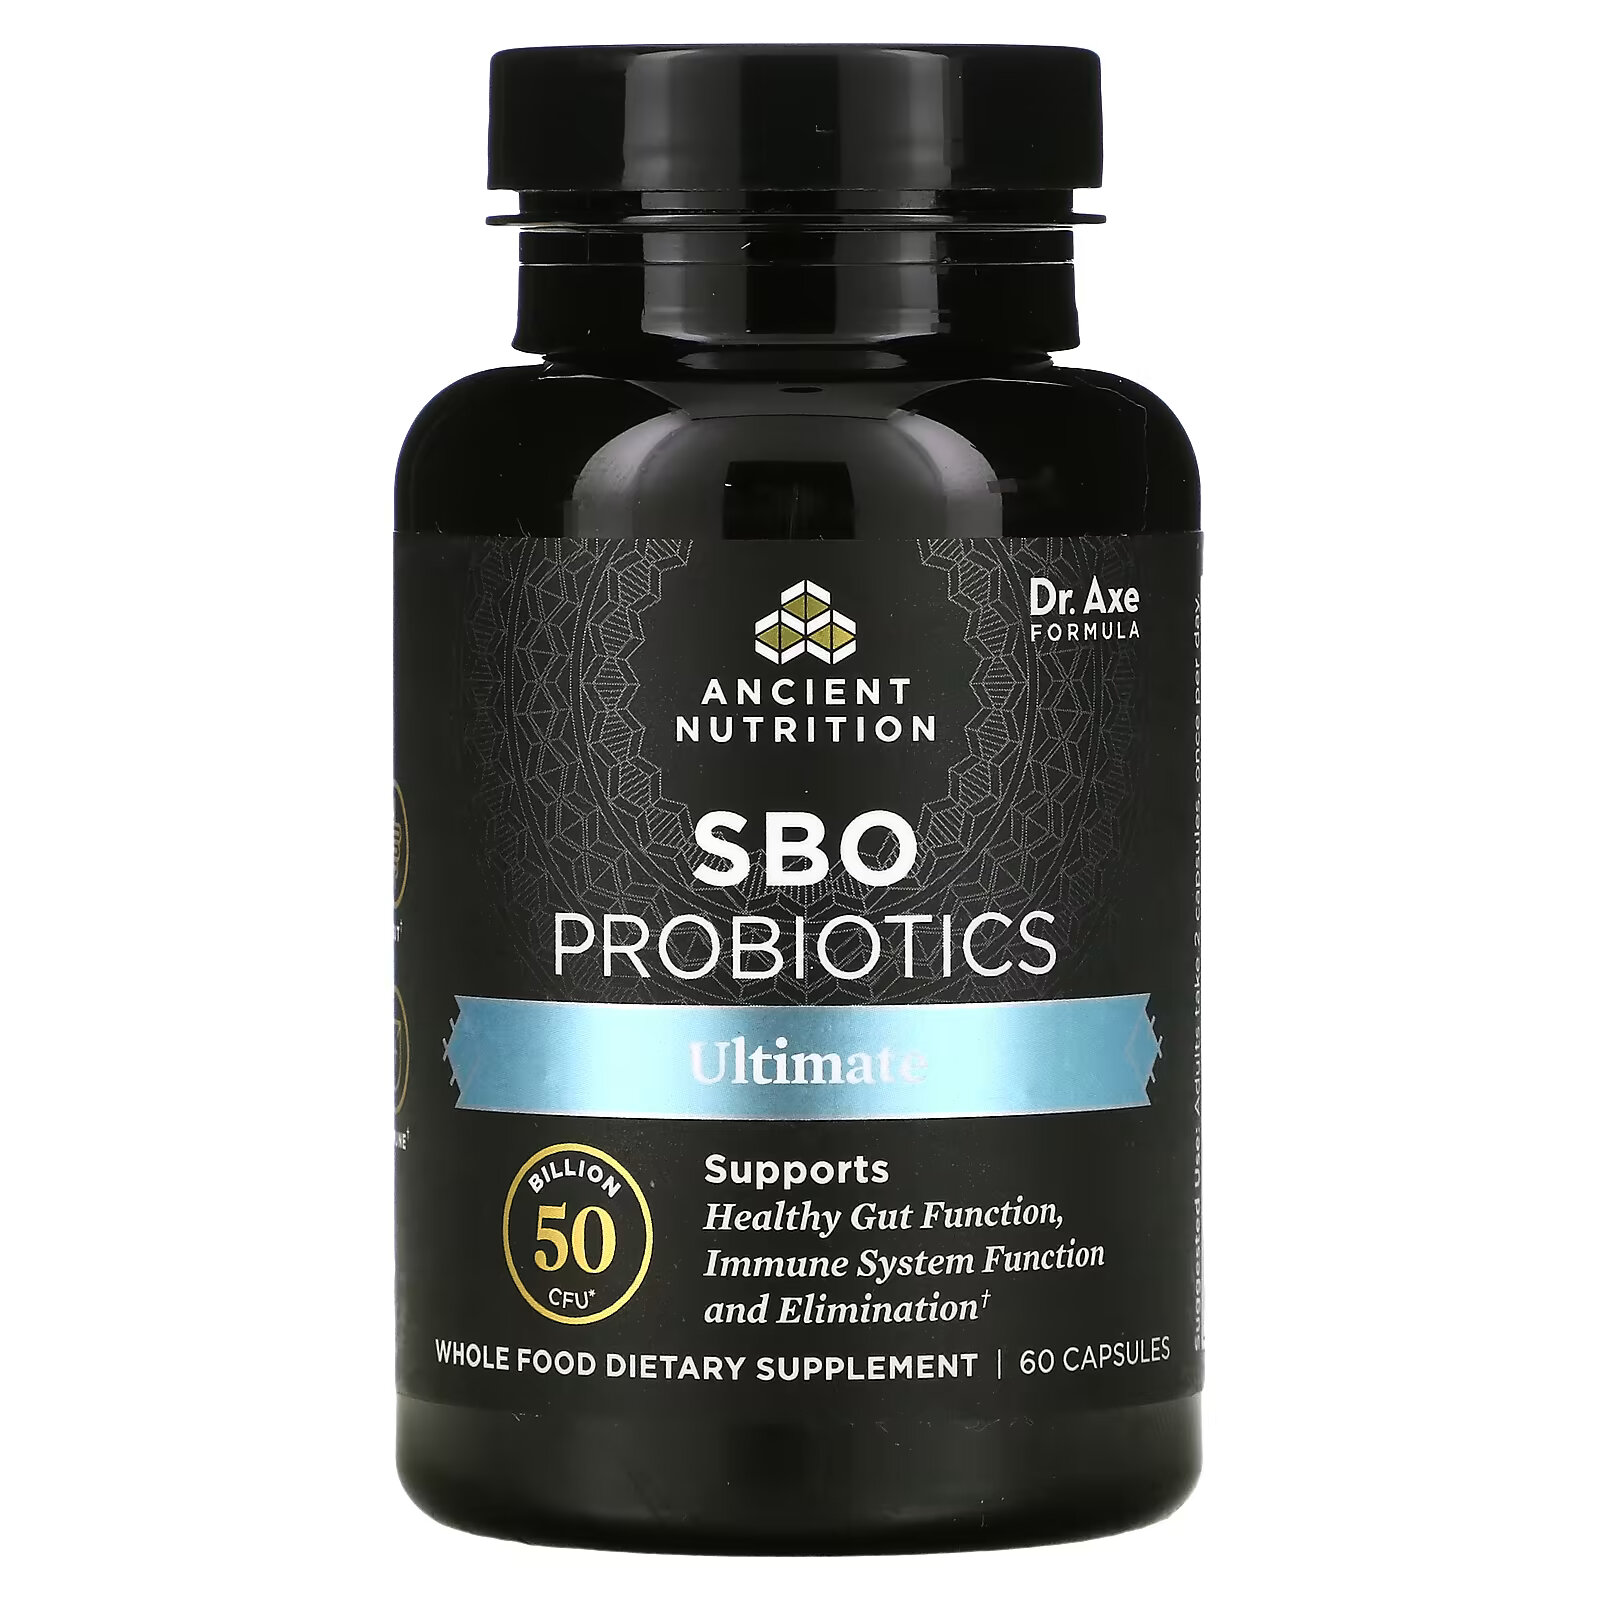 Dr. Axe / Ancient Nutrition, SBO Probiotics, Ultimate, 50 млрд КОЕ, 60 капсул dr axe ancient nutrition sbo probiotics ultimate 50 млрд кое 60 капсул